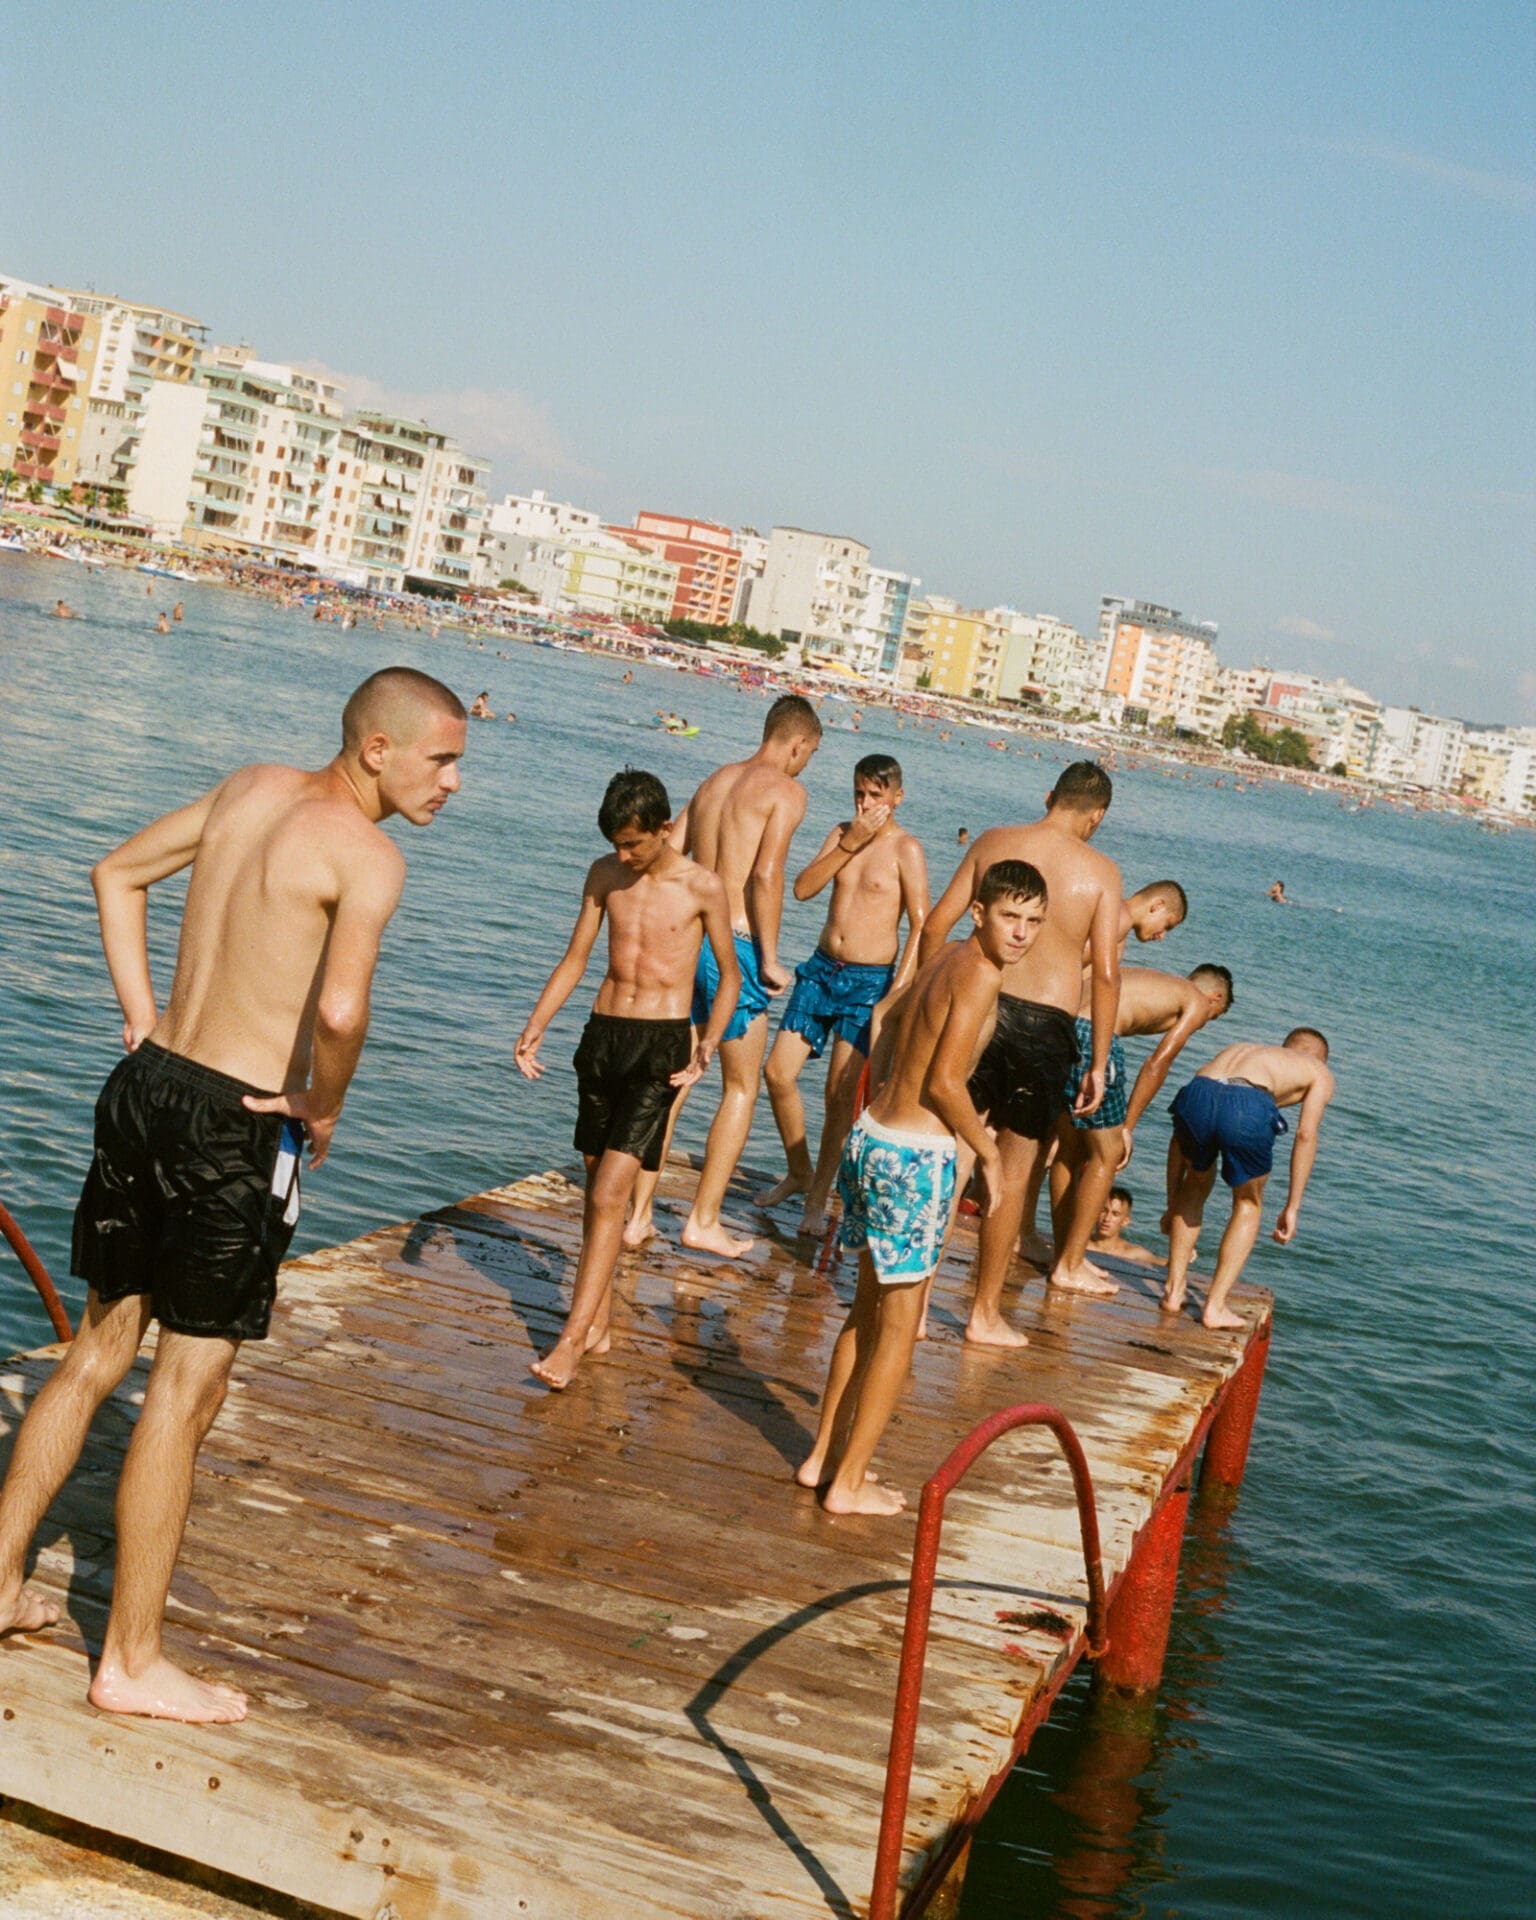 Hazel Gaskin photographs Albania | A group of boys on a wooden jetty jutting out into a body of water, getting ready to jump in